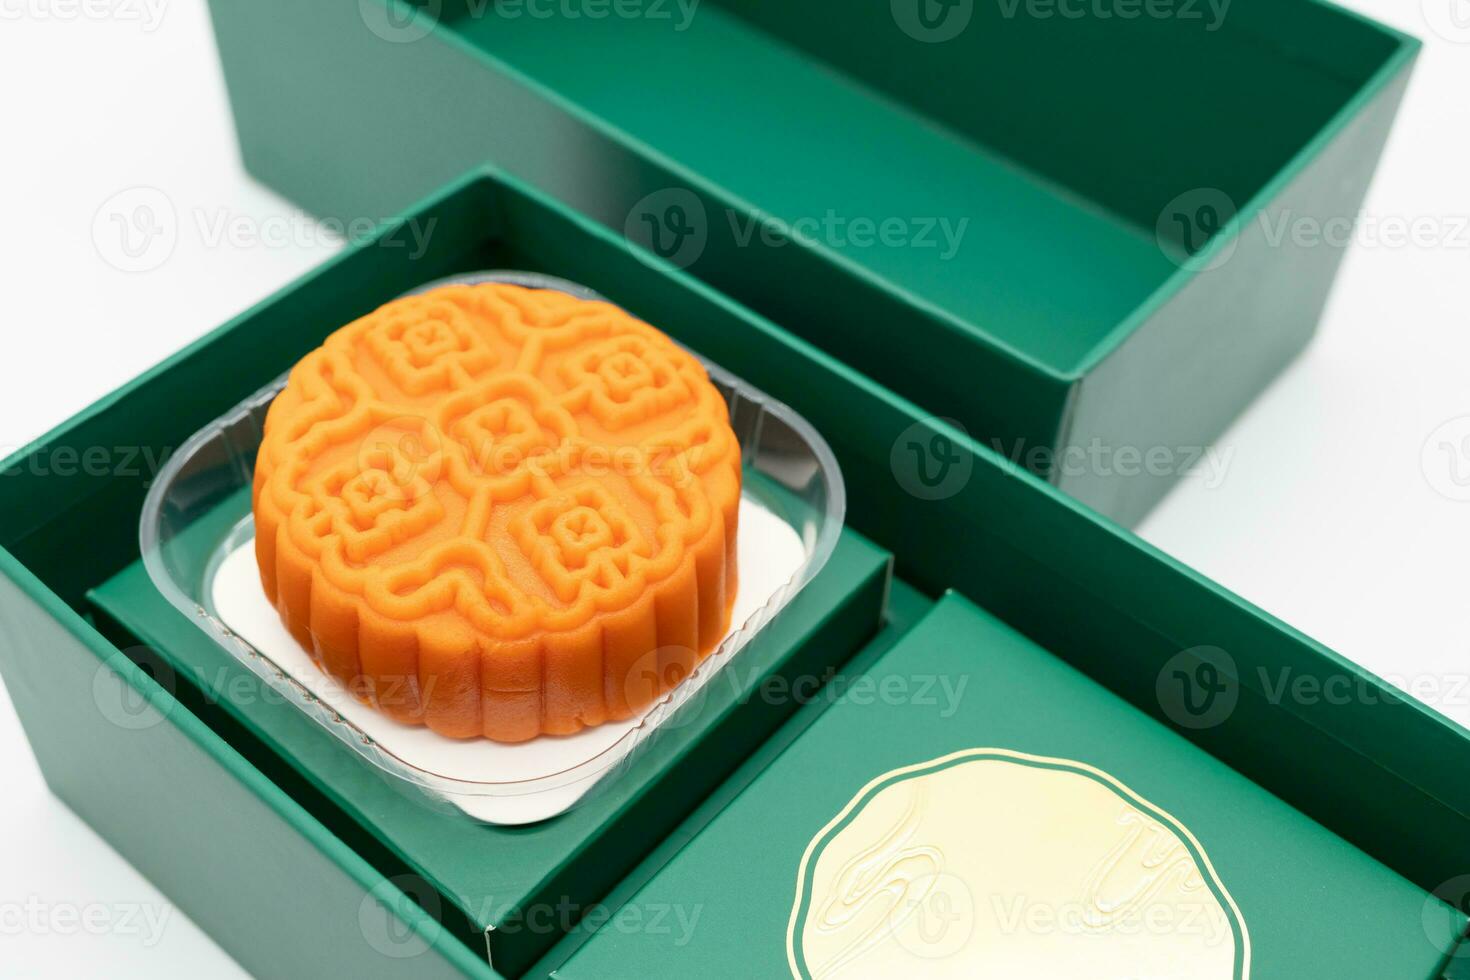 moon cake in green box. Moon cakes gift box for the Chinese Mid-autumn festival isolated on white background. photo